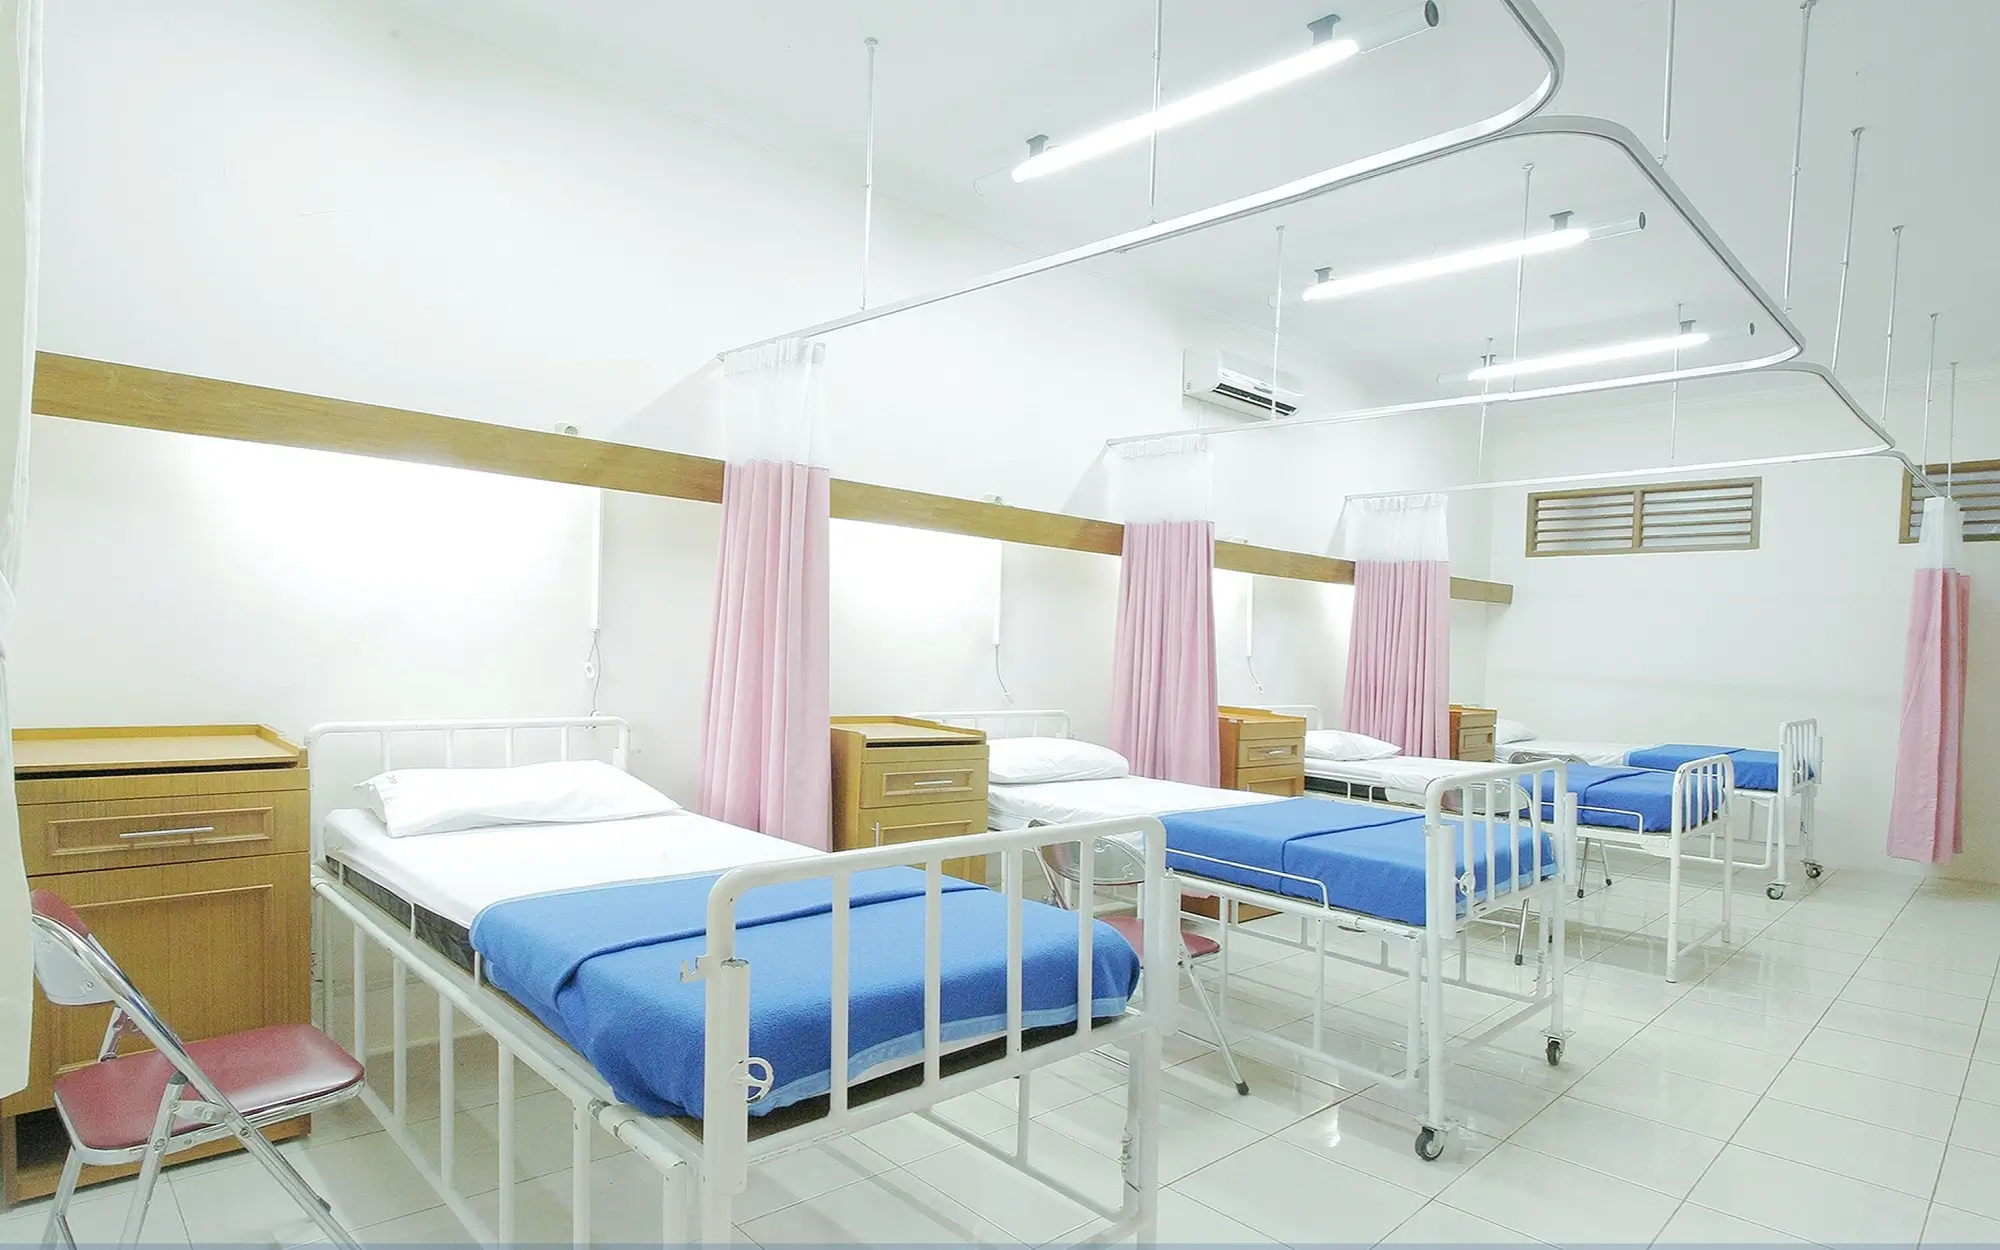 Empty beds inside a hospital, representing the concept of GST and health services.